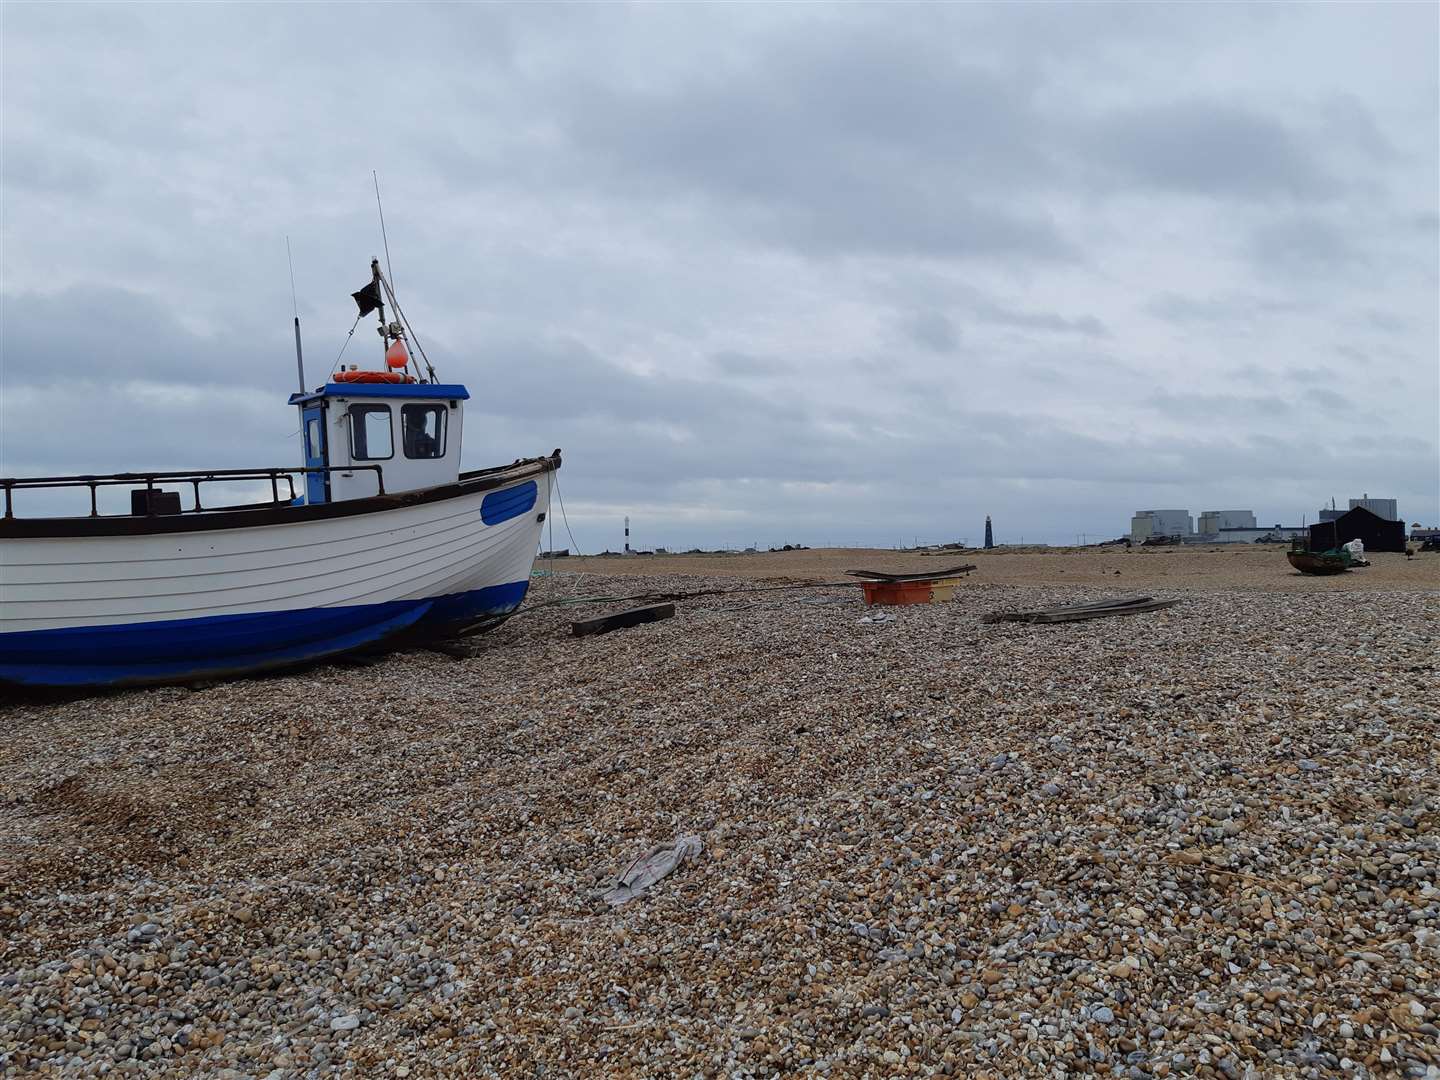 Dungeness bagged top spot in Kent